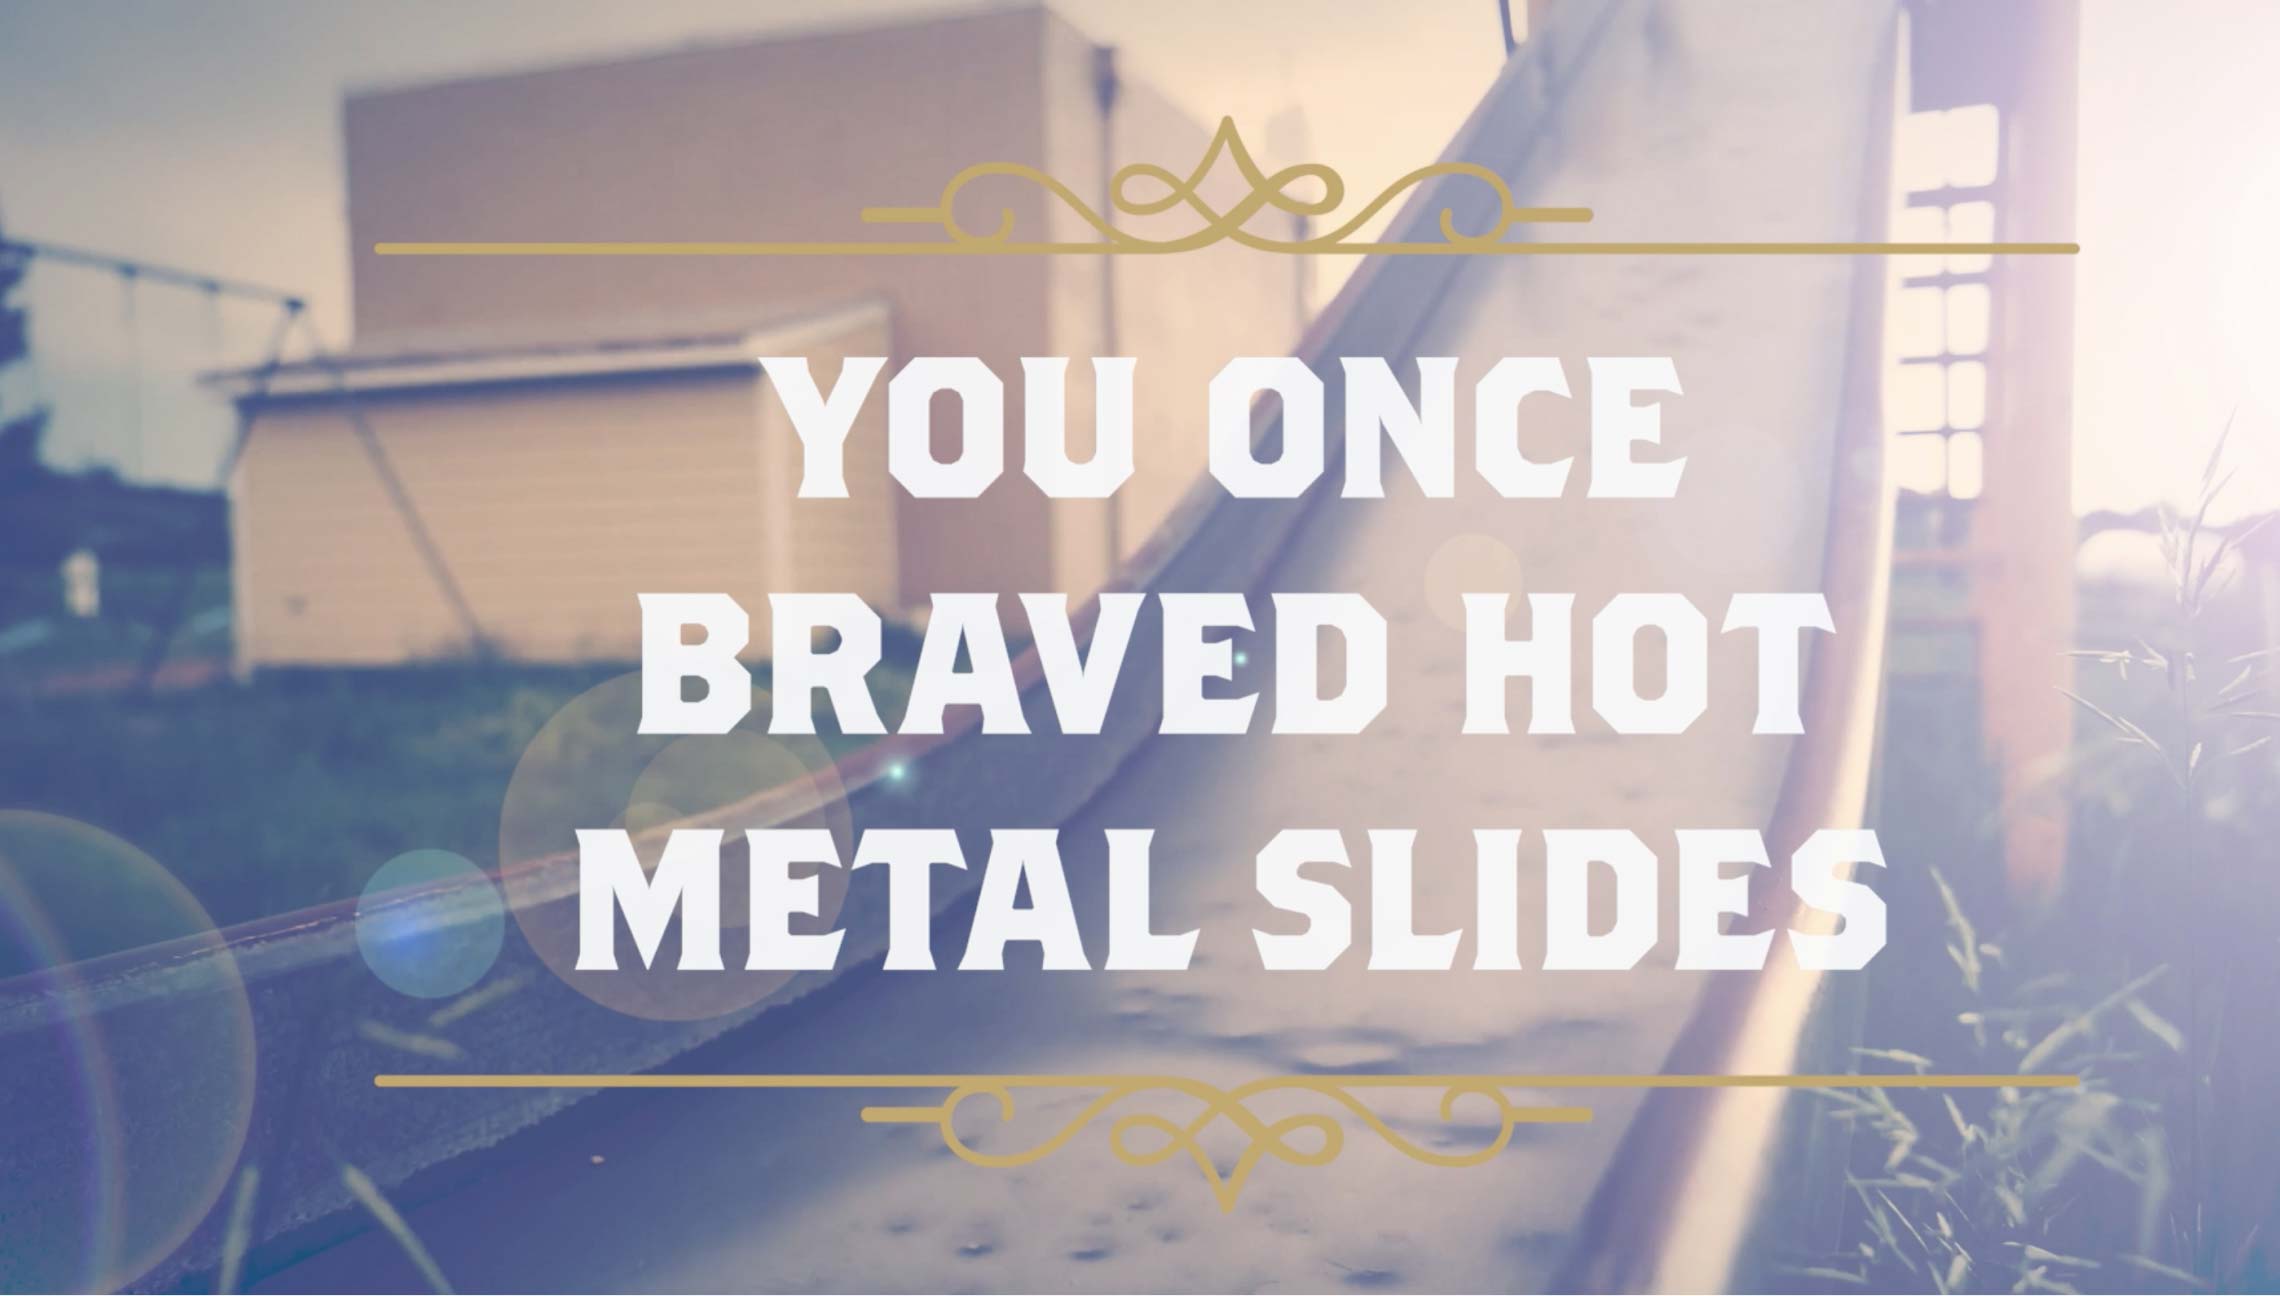 "If you once braved hot metal slides." Click to watch the video.